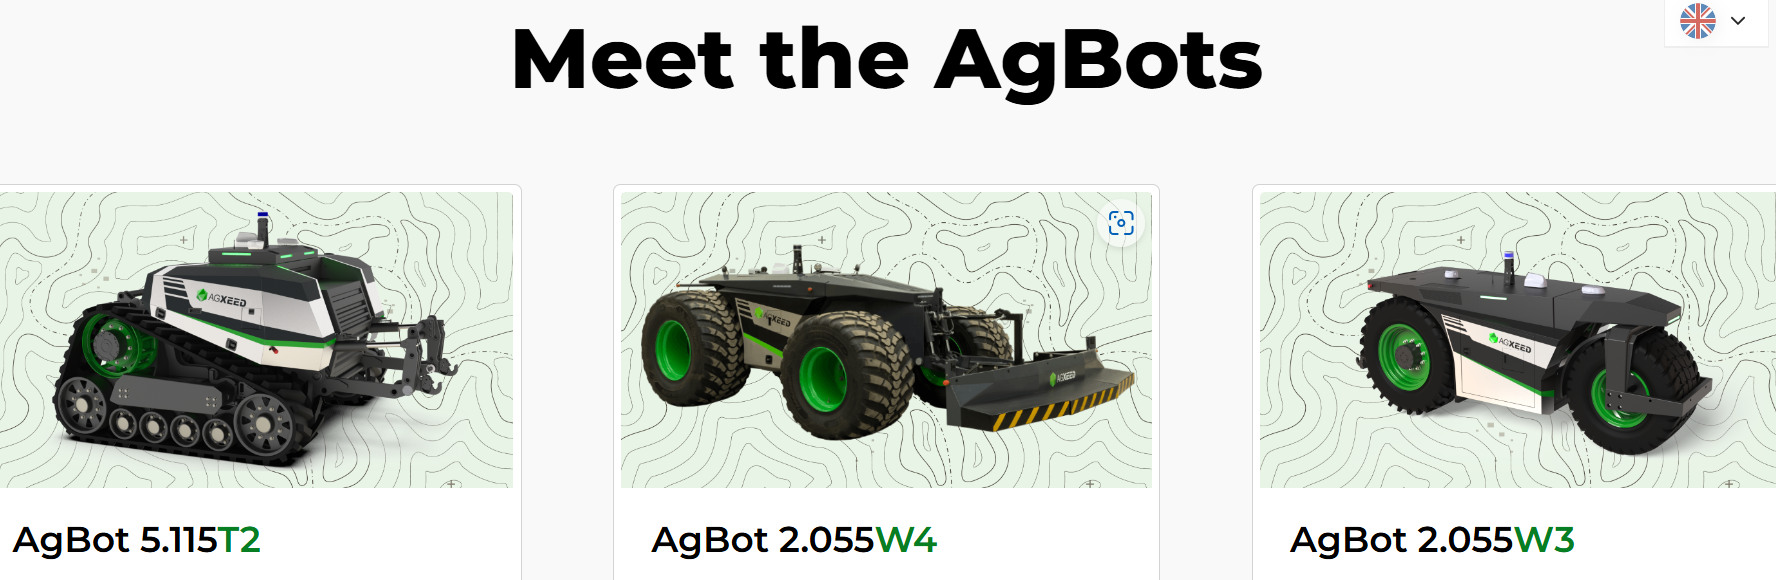 Agbots for homepage